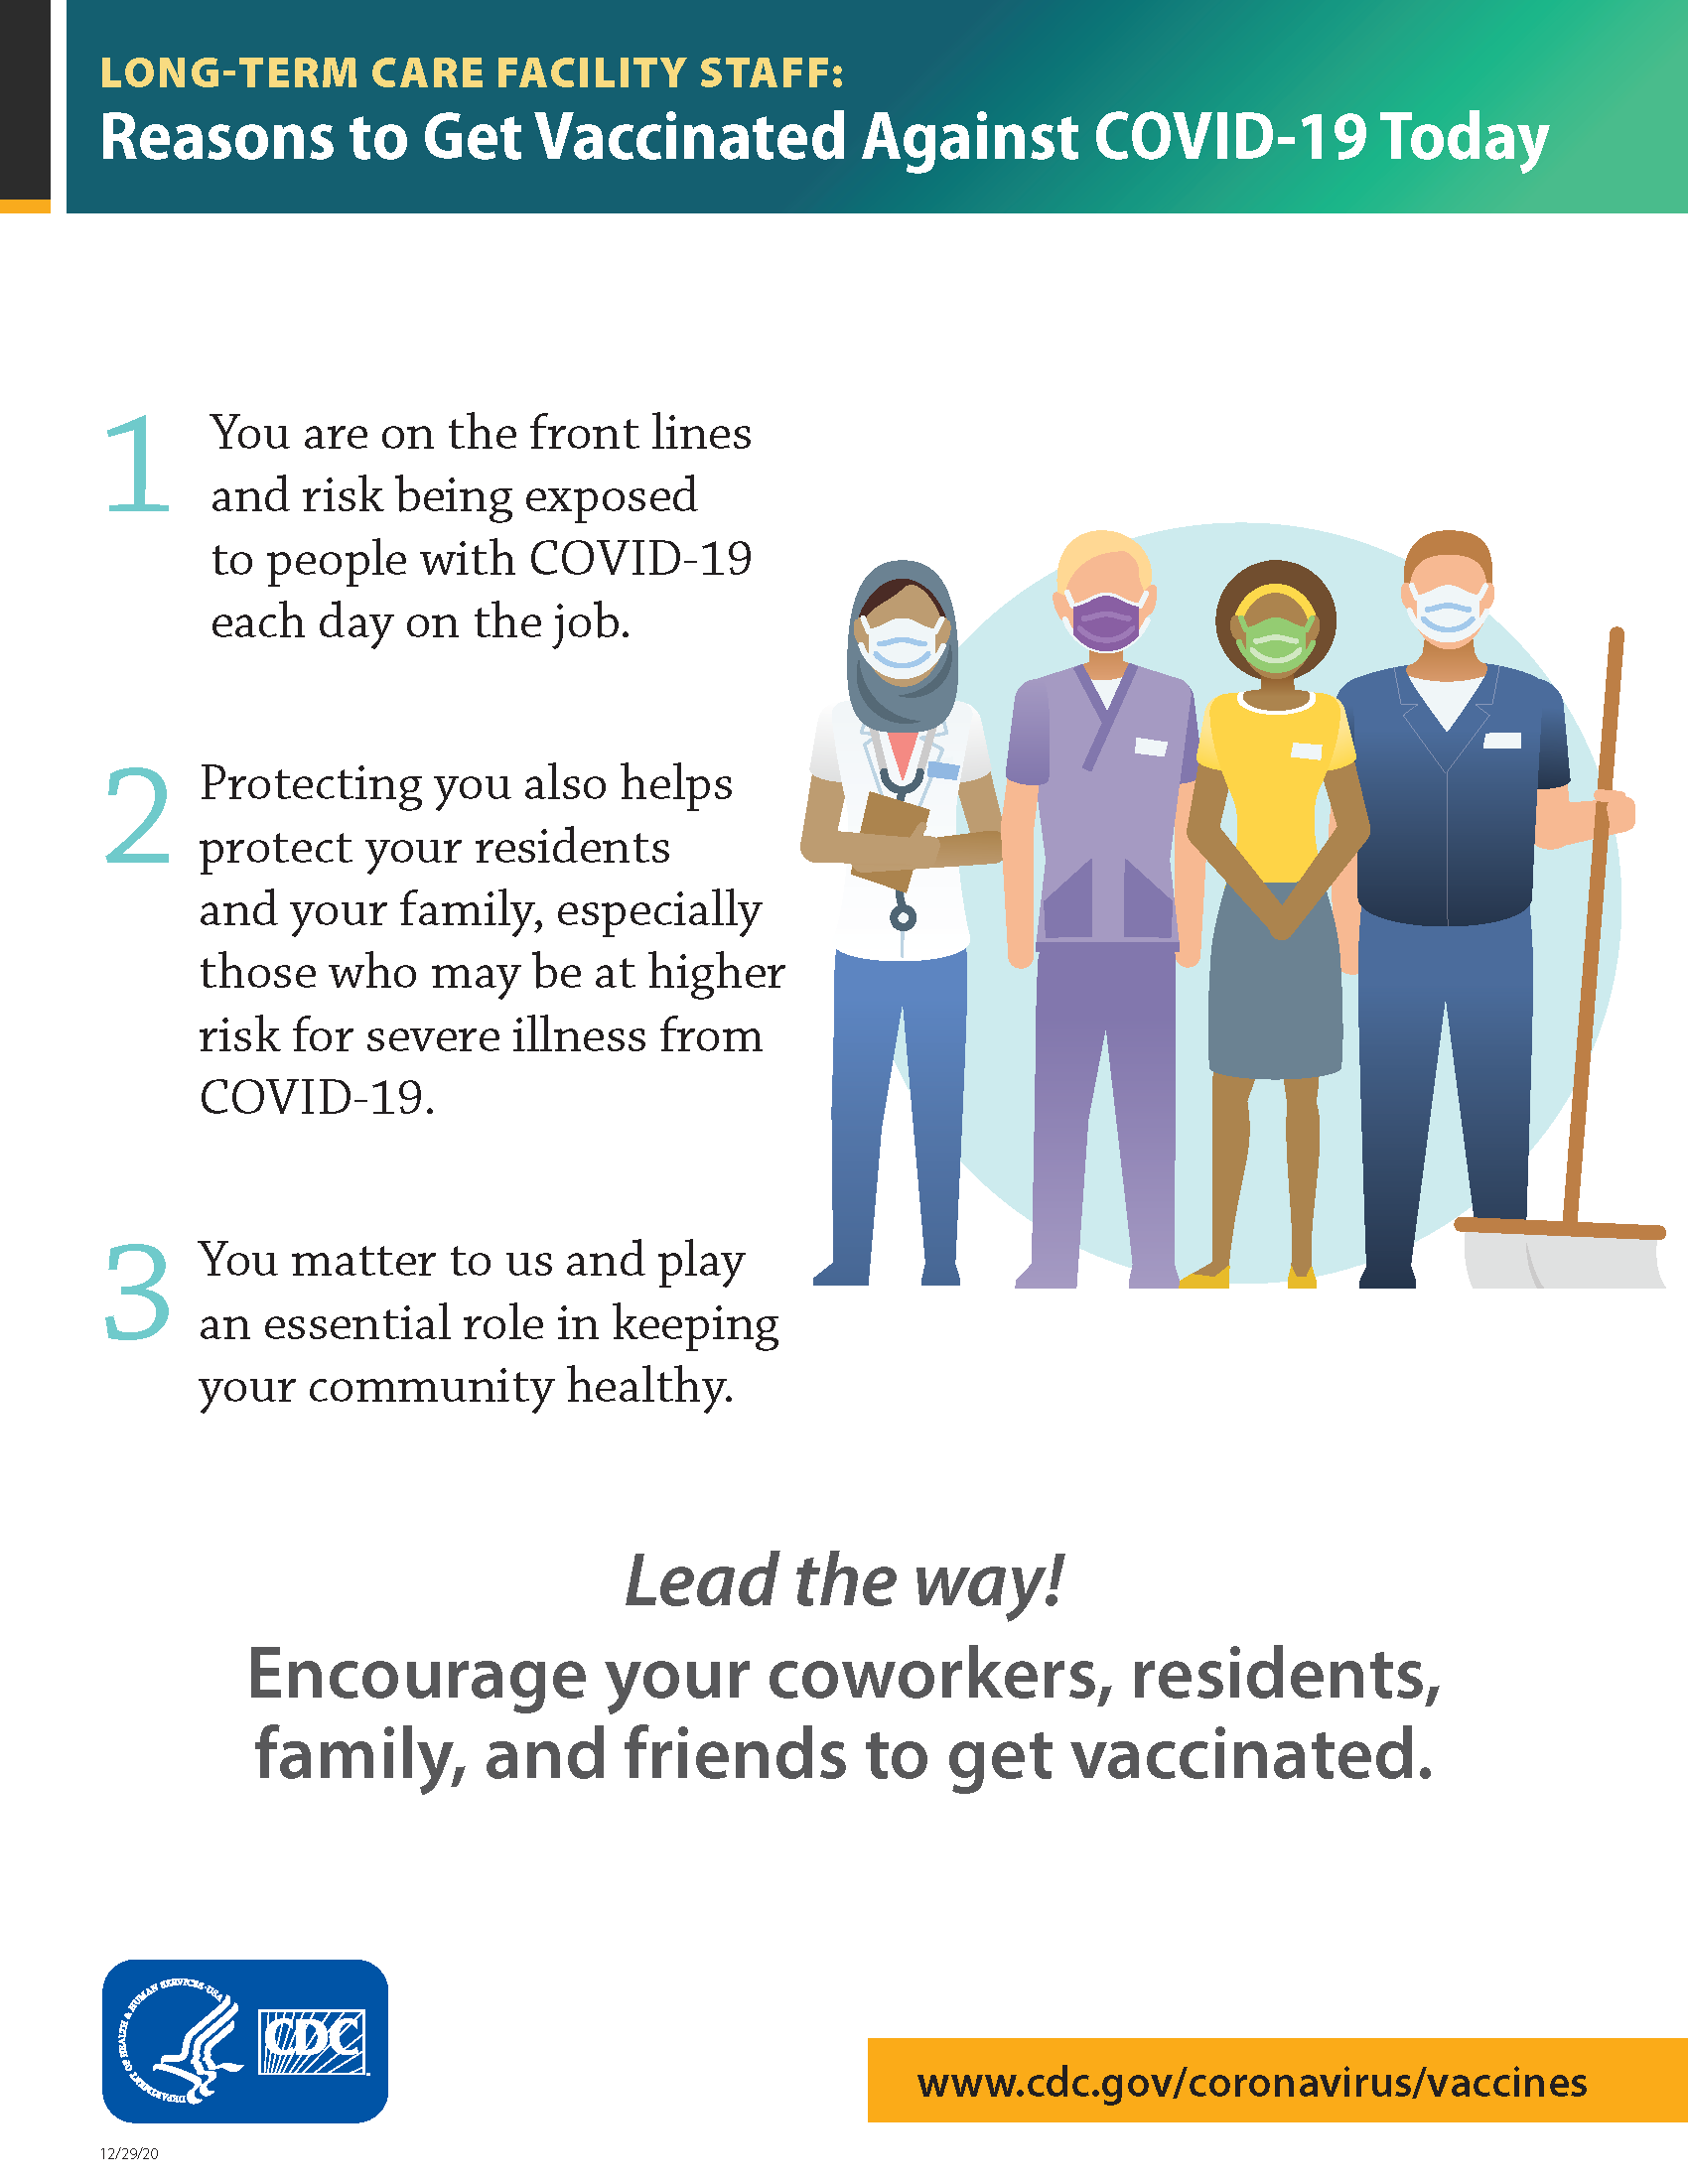 Long-Term Care Facility Staff: Reasons to Get Vaccinated Against COVID-19 Today Flyer